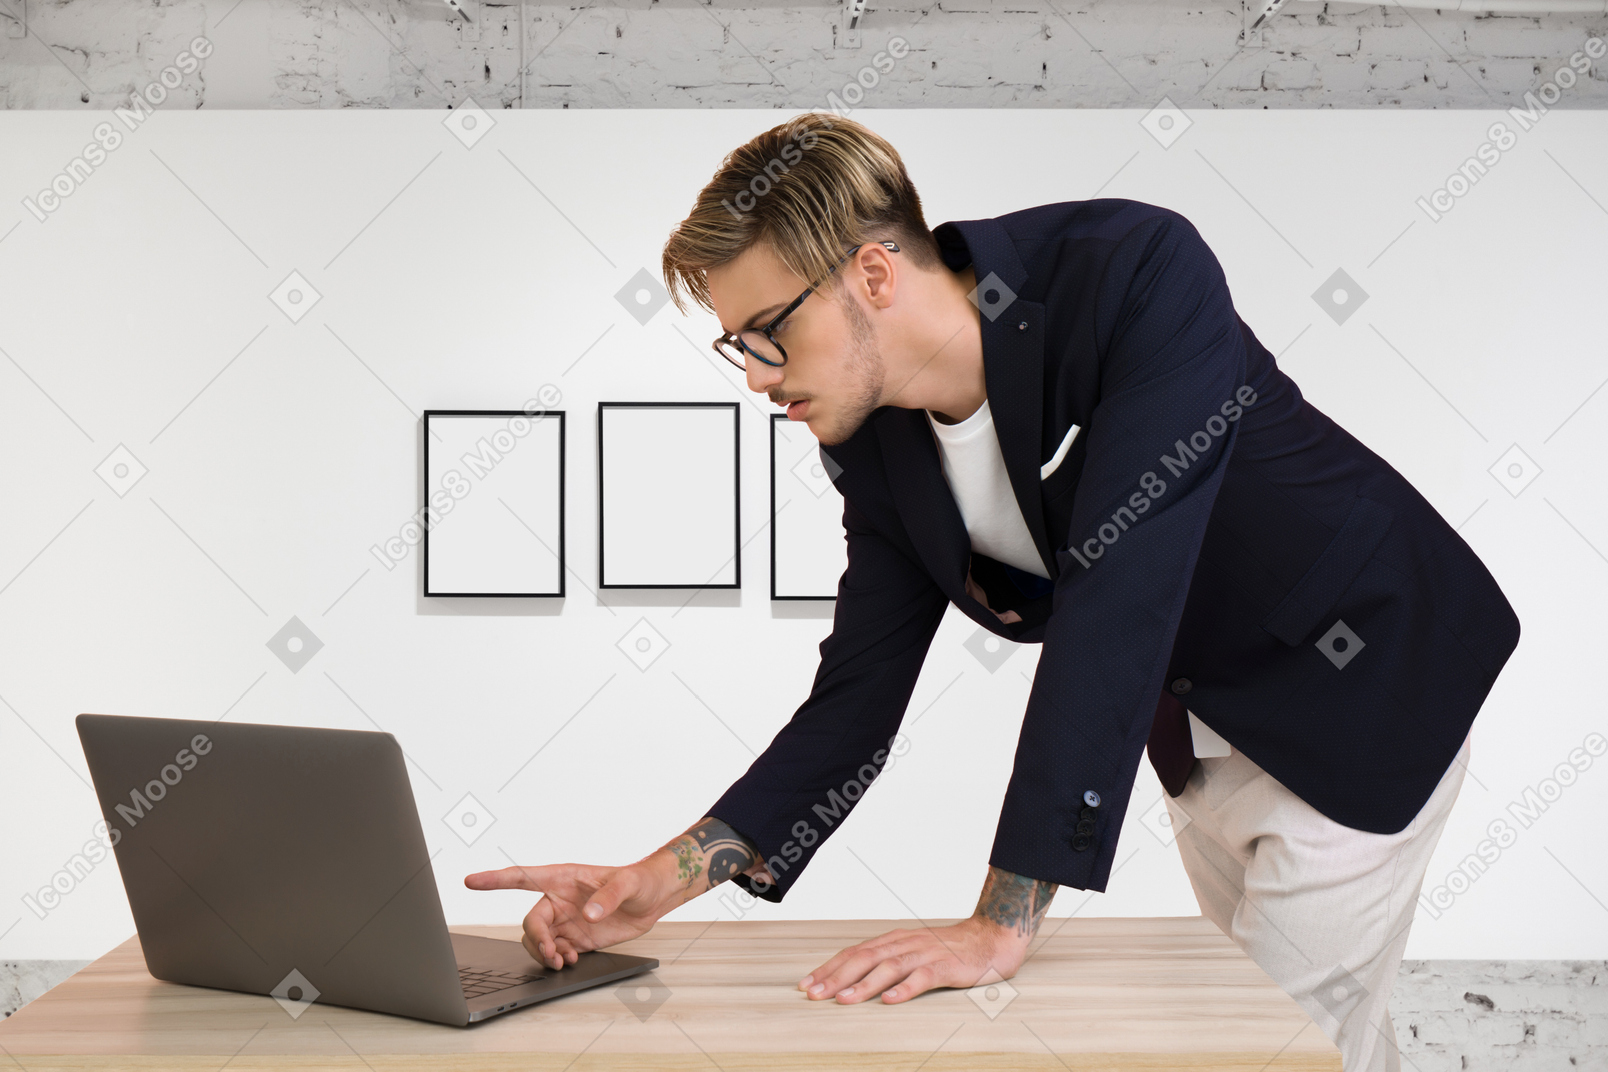 A man in a suit leaning over a laptop